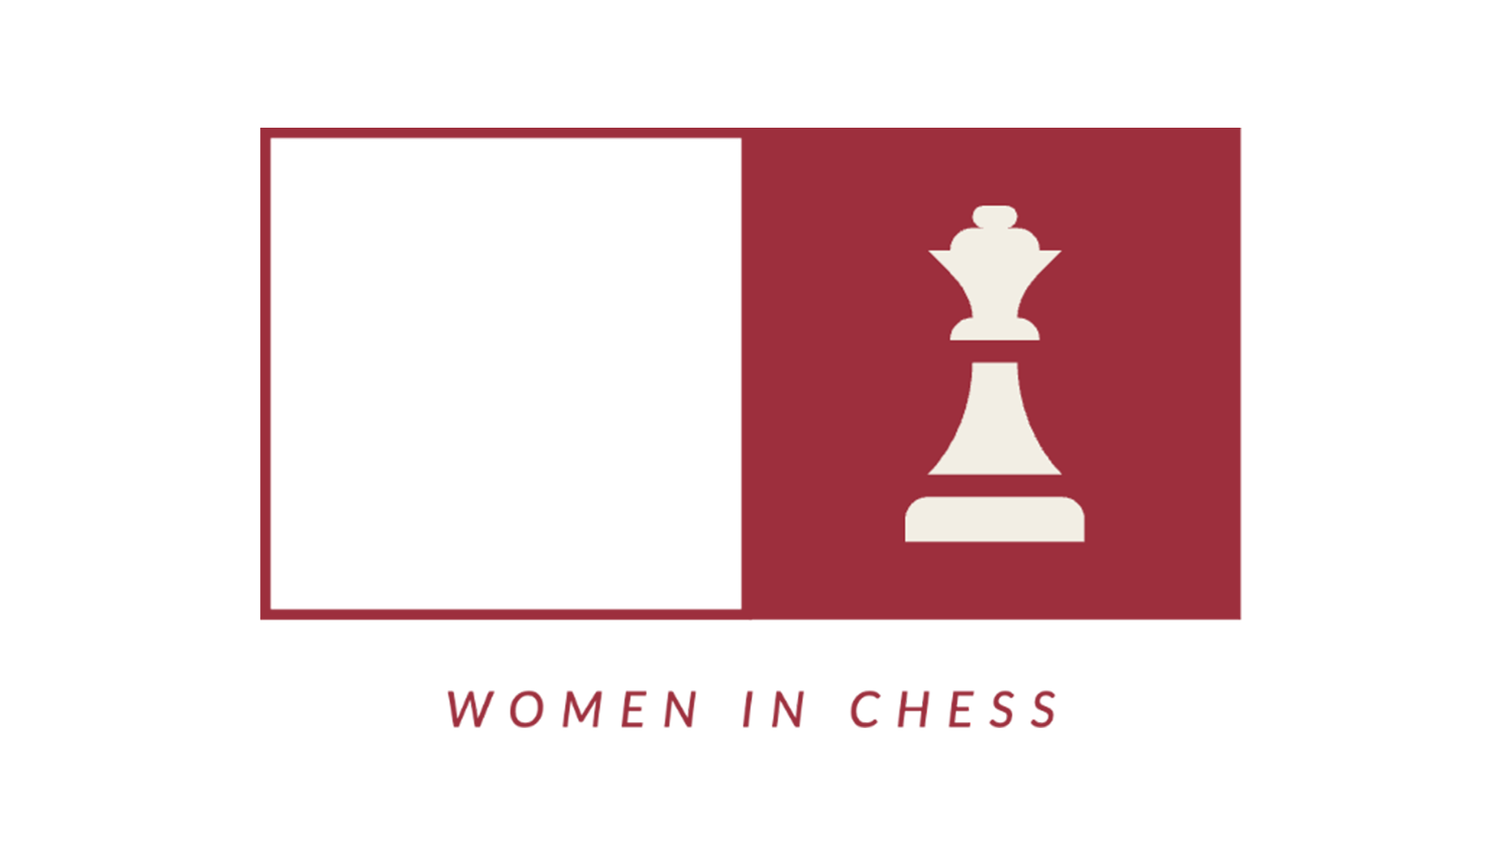 Women's Chess' and equal footing